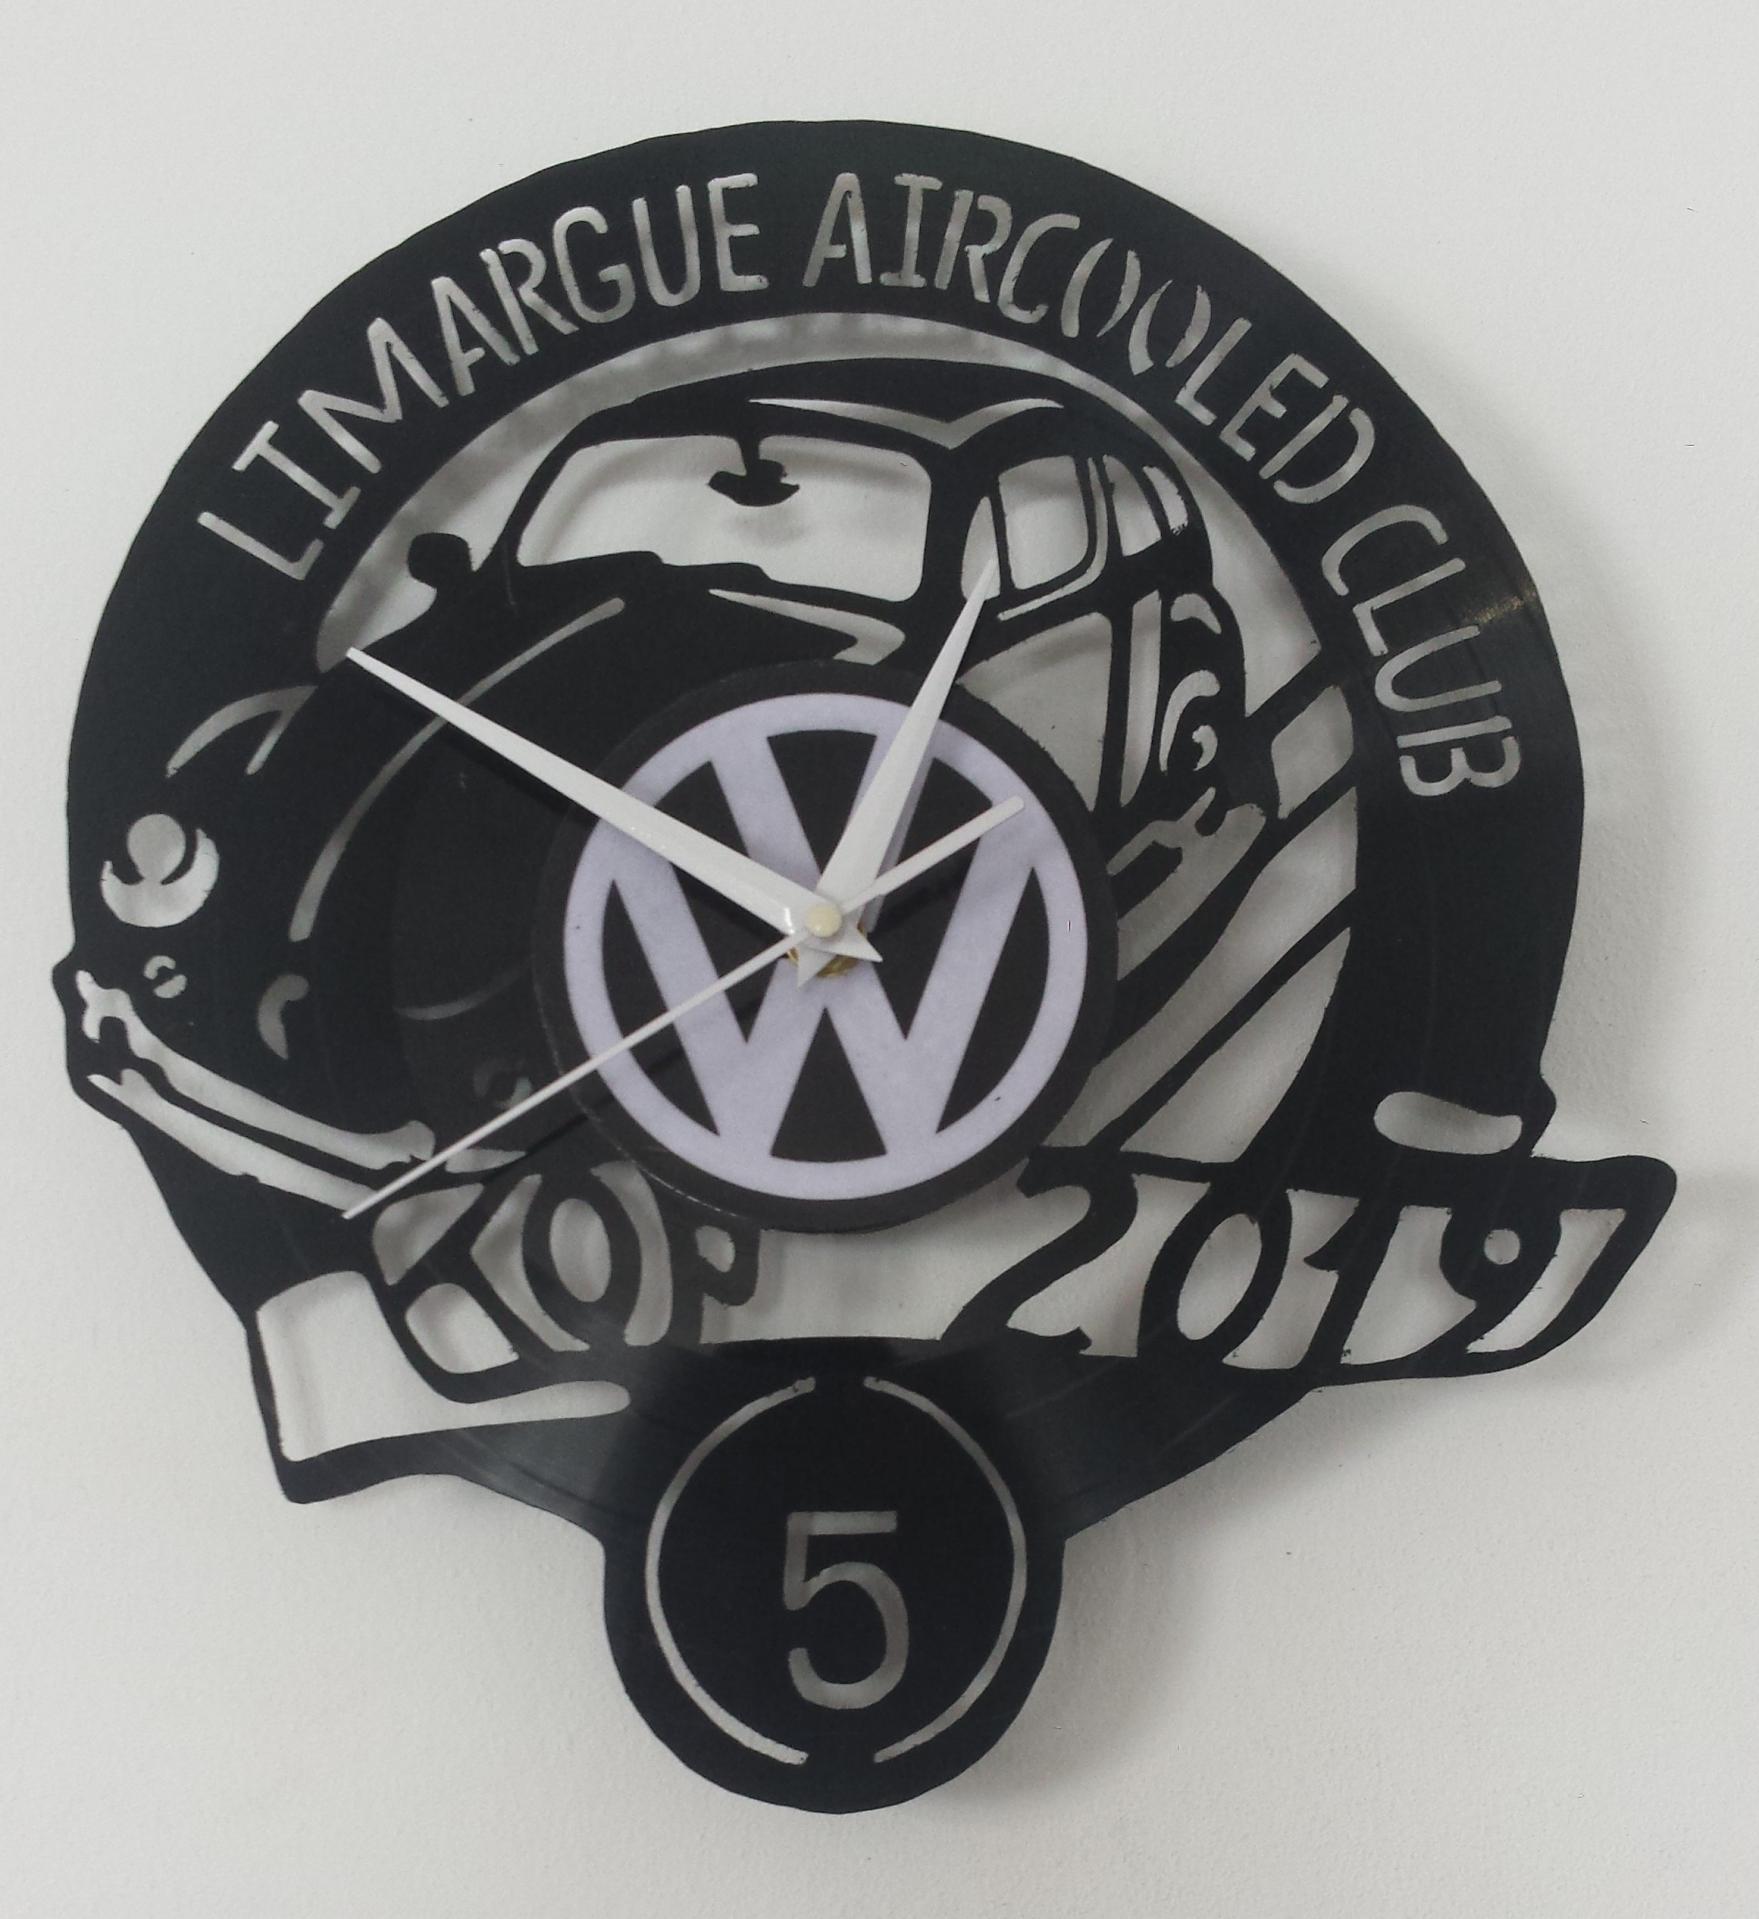 Limargue aircooled club